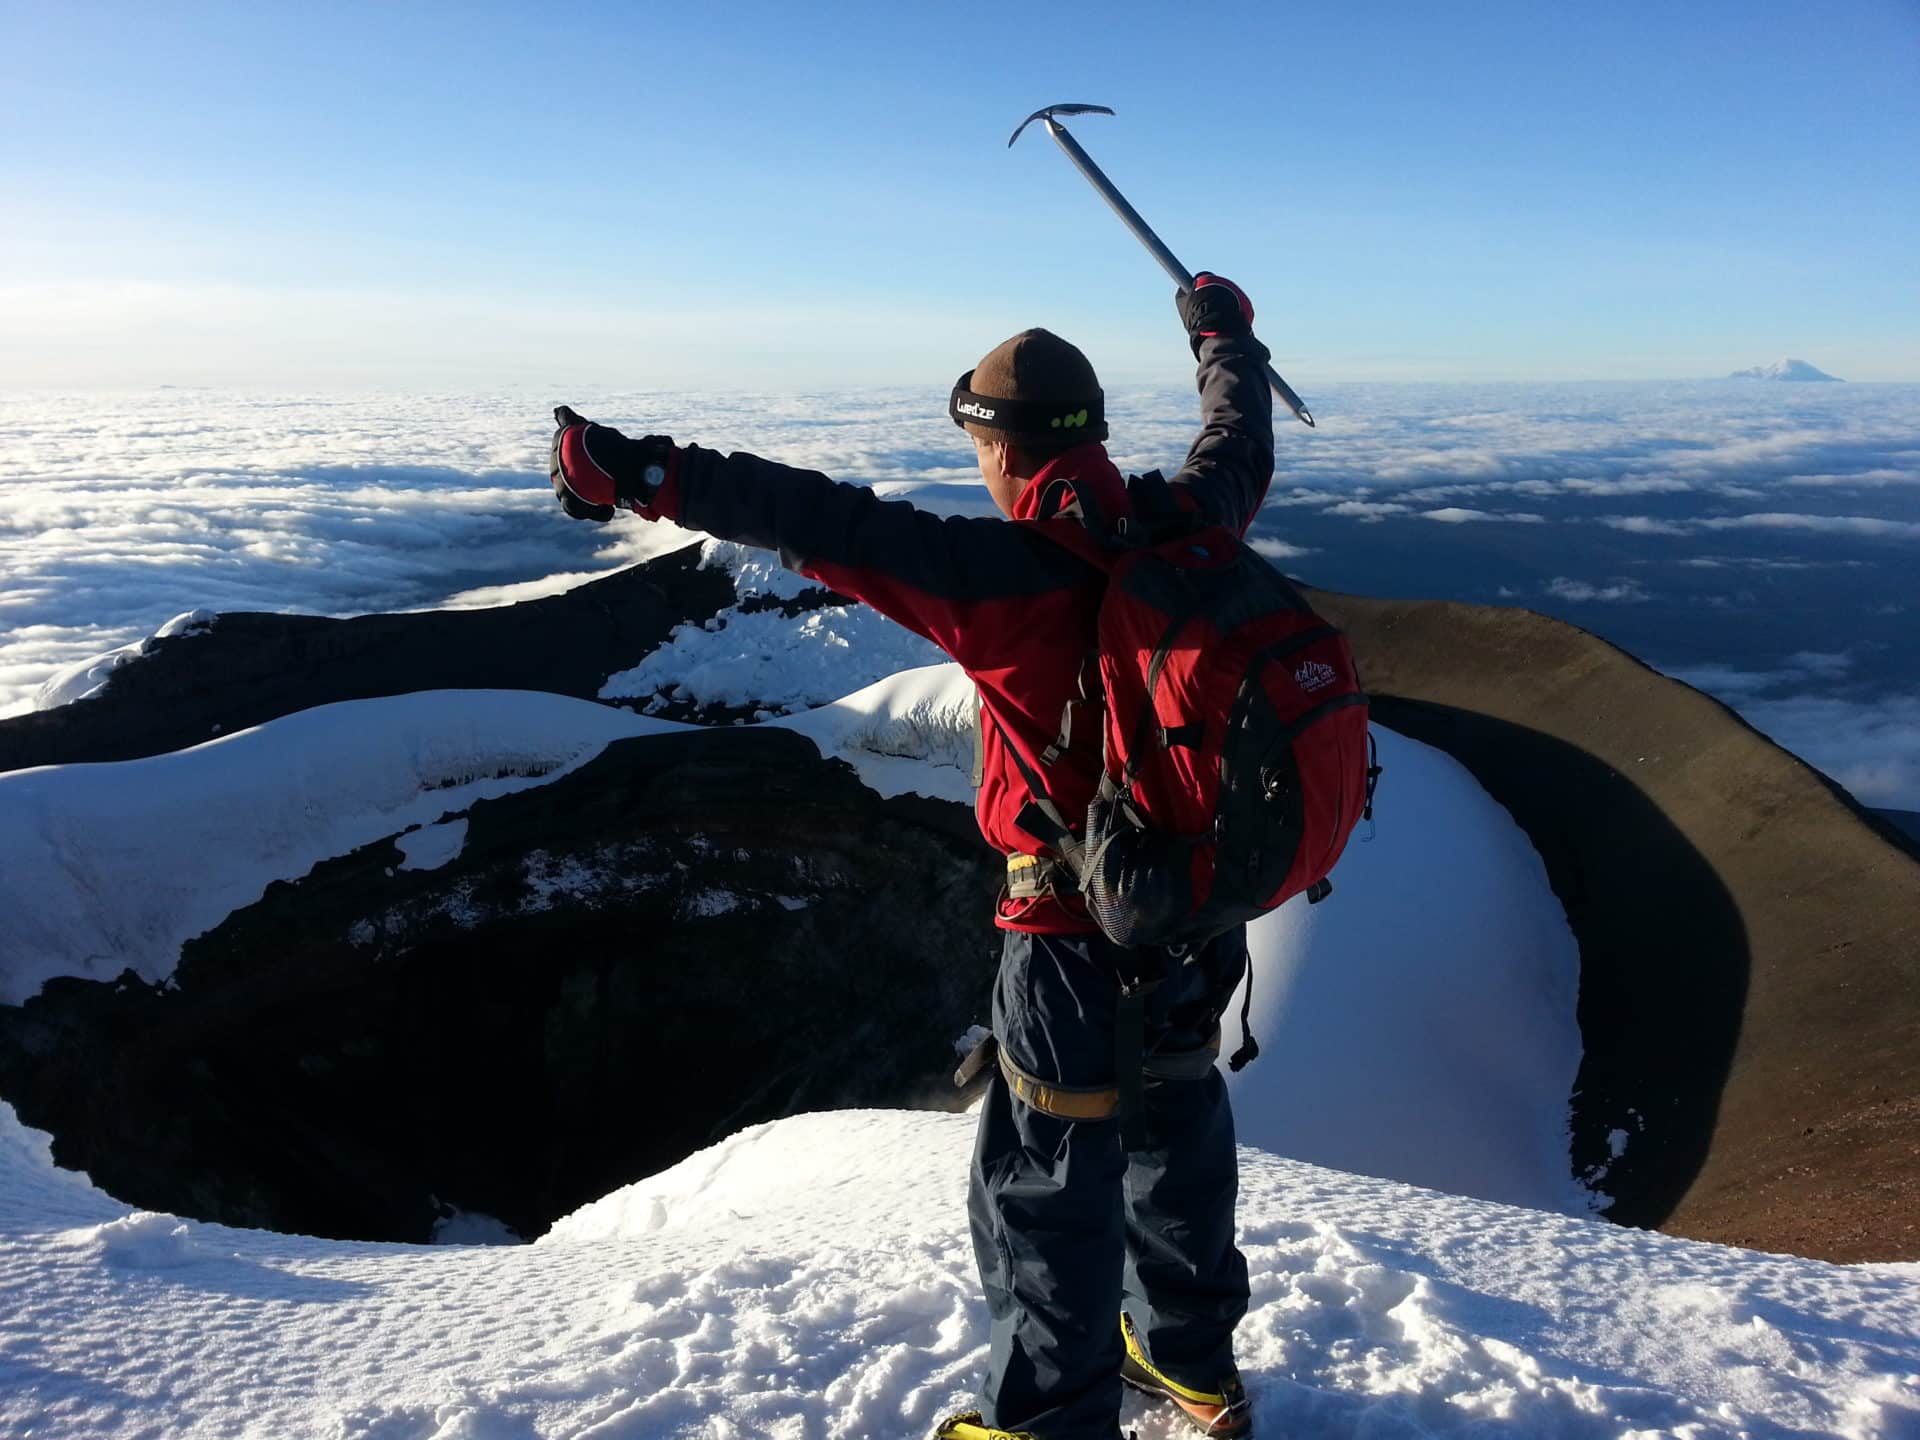 Three Day Mountaineering Tour To Cotopaxi Summit. 3 Day Trip